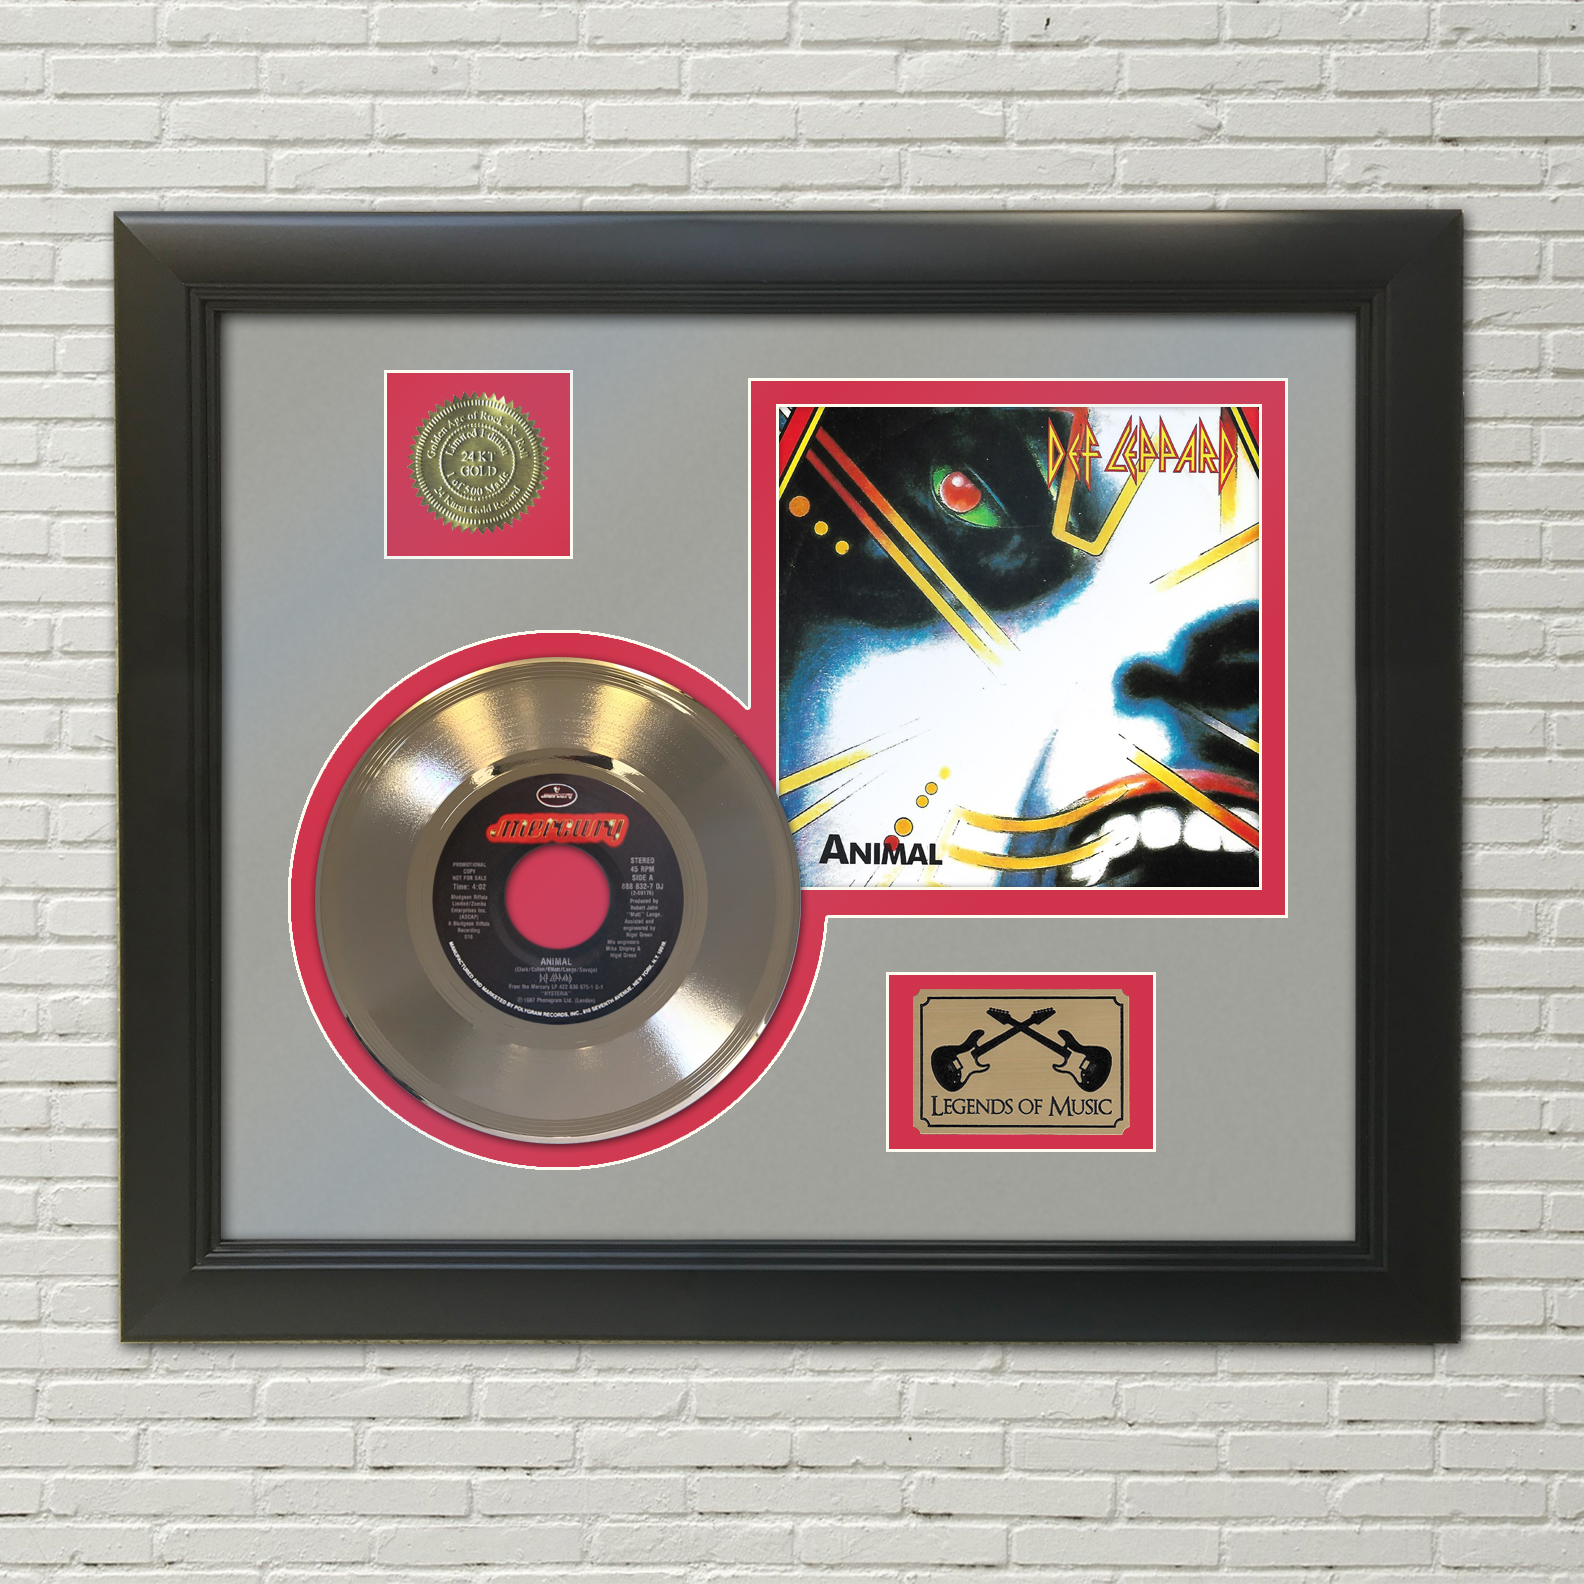 Def Leppard Animal Framed Picture Sleeve Gold 45 Record Display - Gold  Record Outlet Album and Disc Collectible Memorabilia